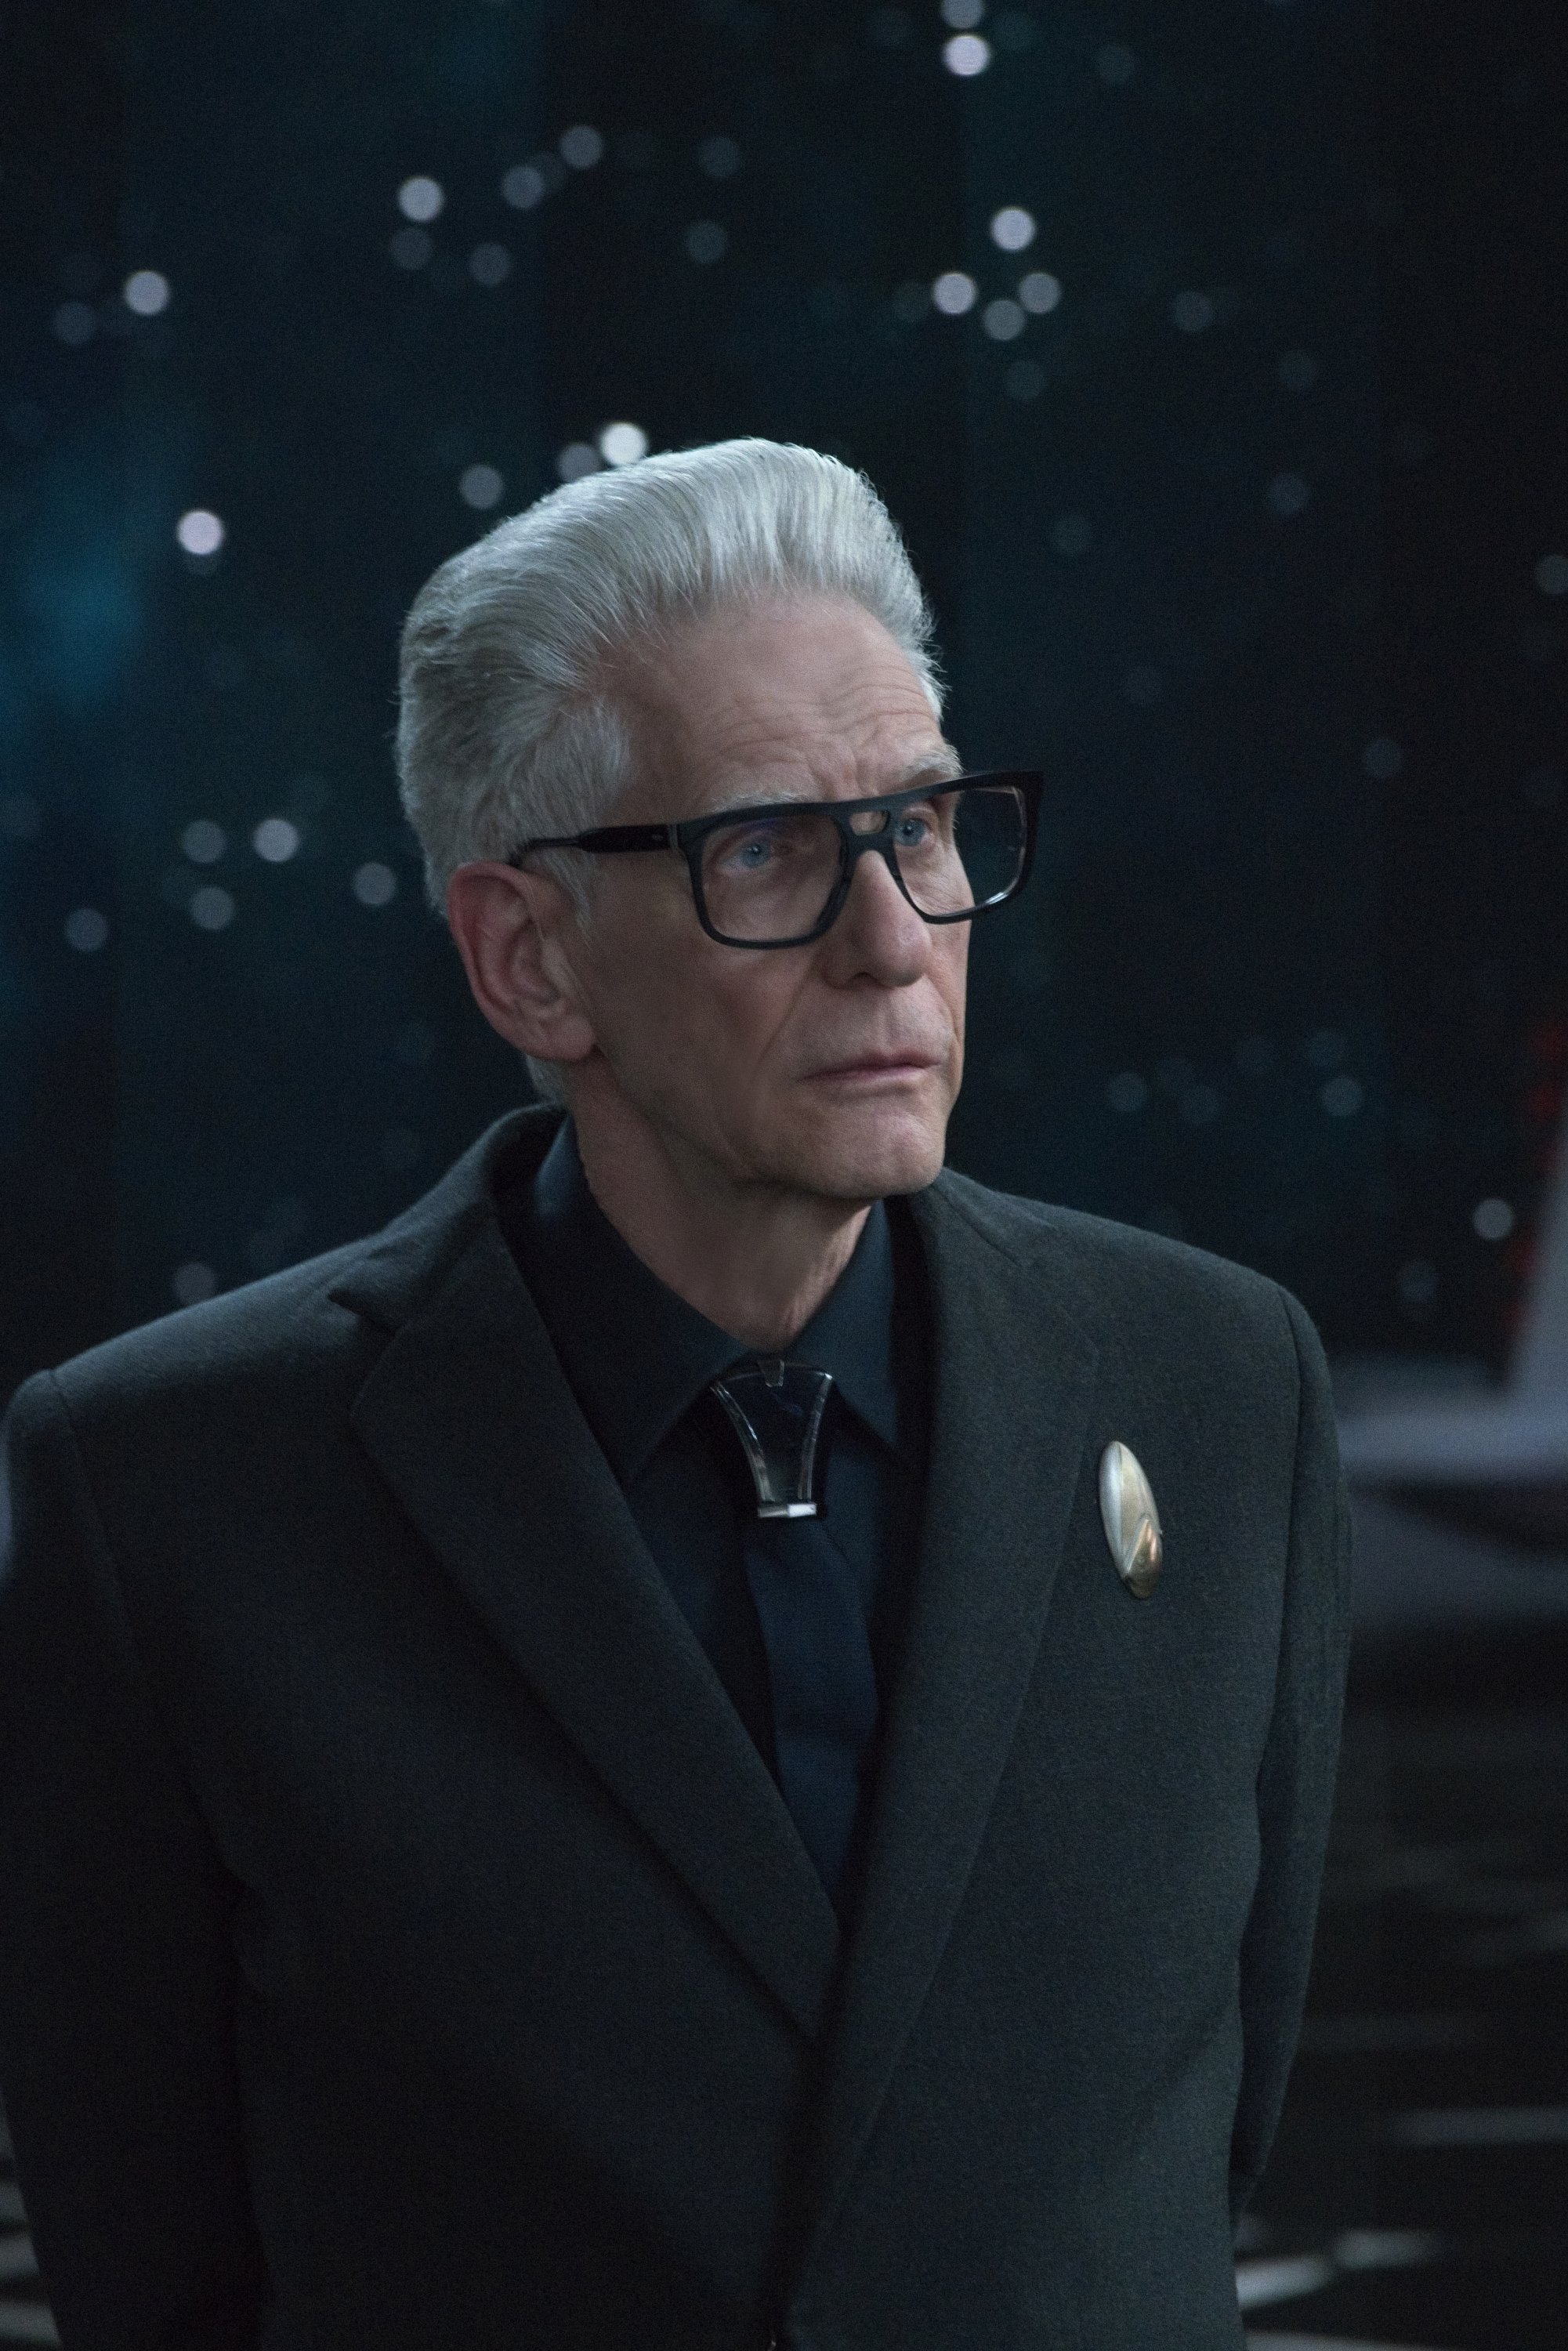   Pictured: David Cronenberg as Kovich of the Paramount+ original series STAR TREK: DISCOVERY. Photo Cr: Michael Gibson/Paramount+ © 2021 CBS Interactive. All Rights Reserved.  